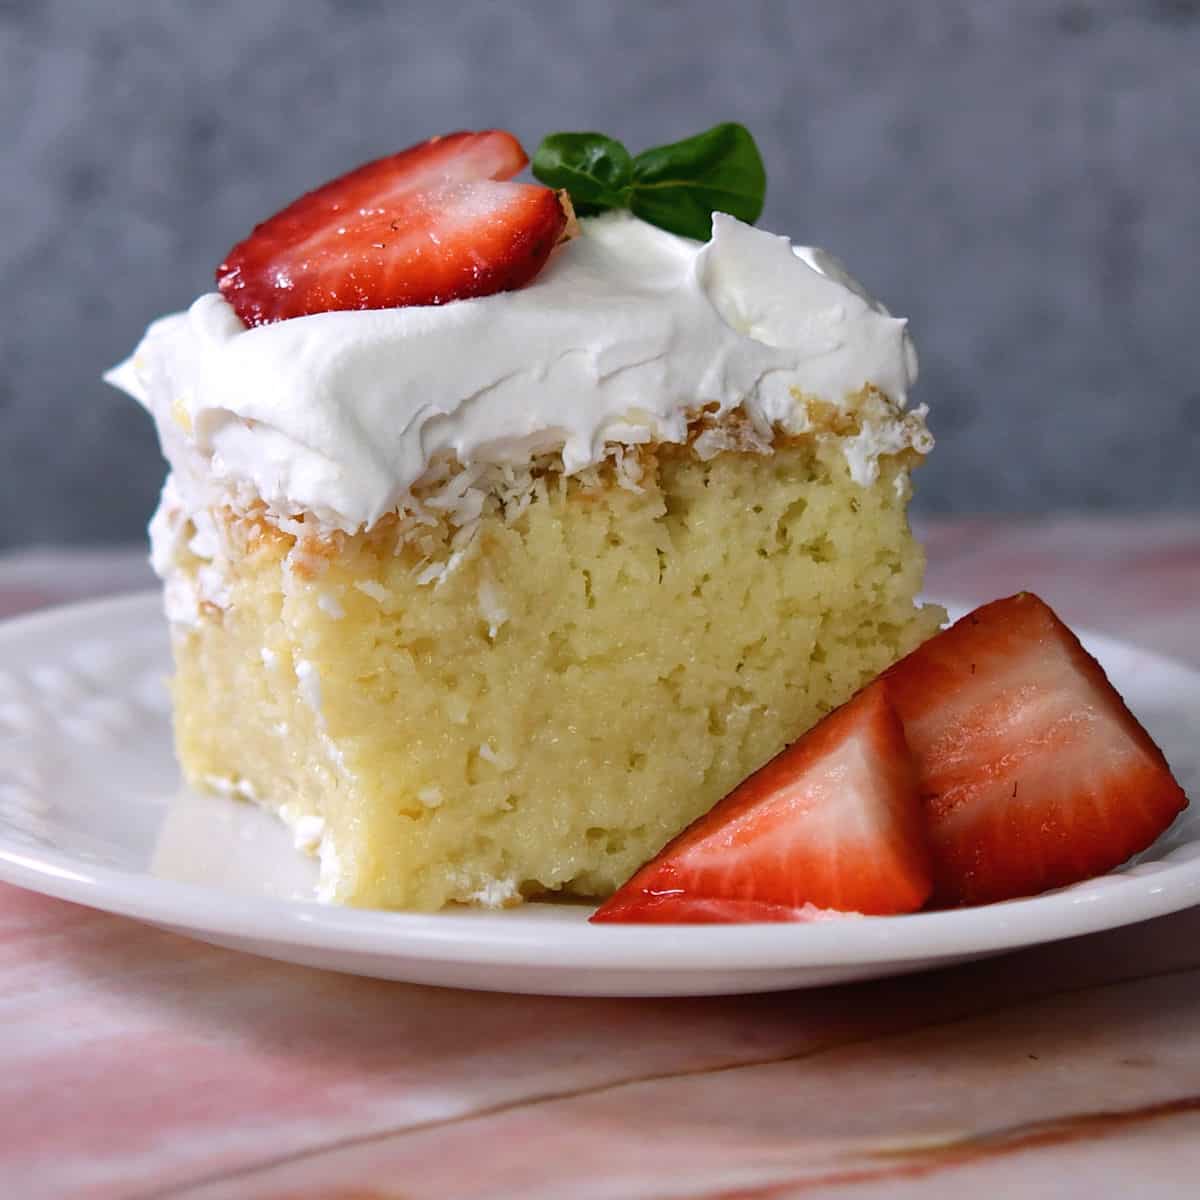 A piece of coconut tres leches cake on a white plate, garnished with strawberries.